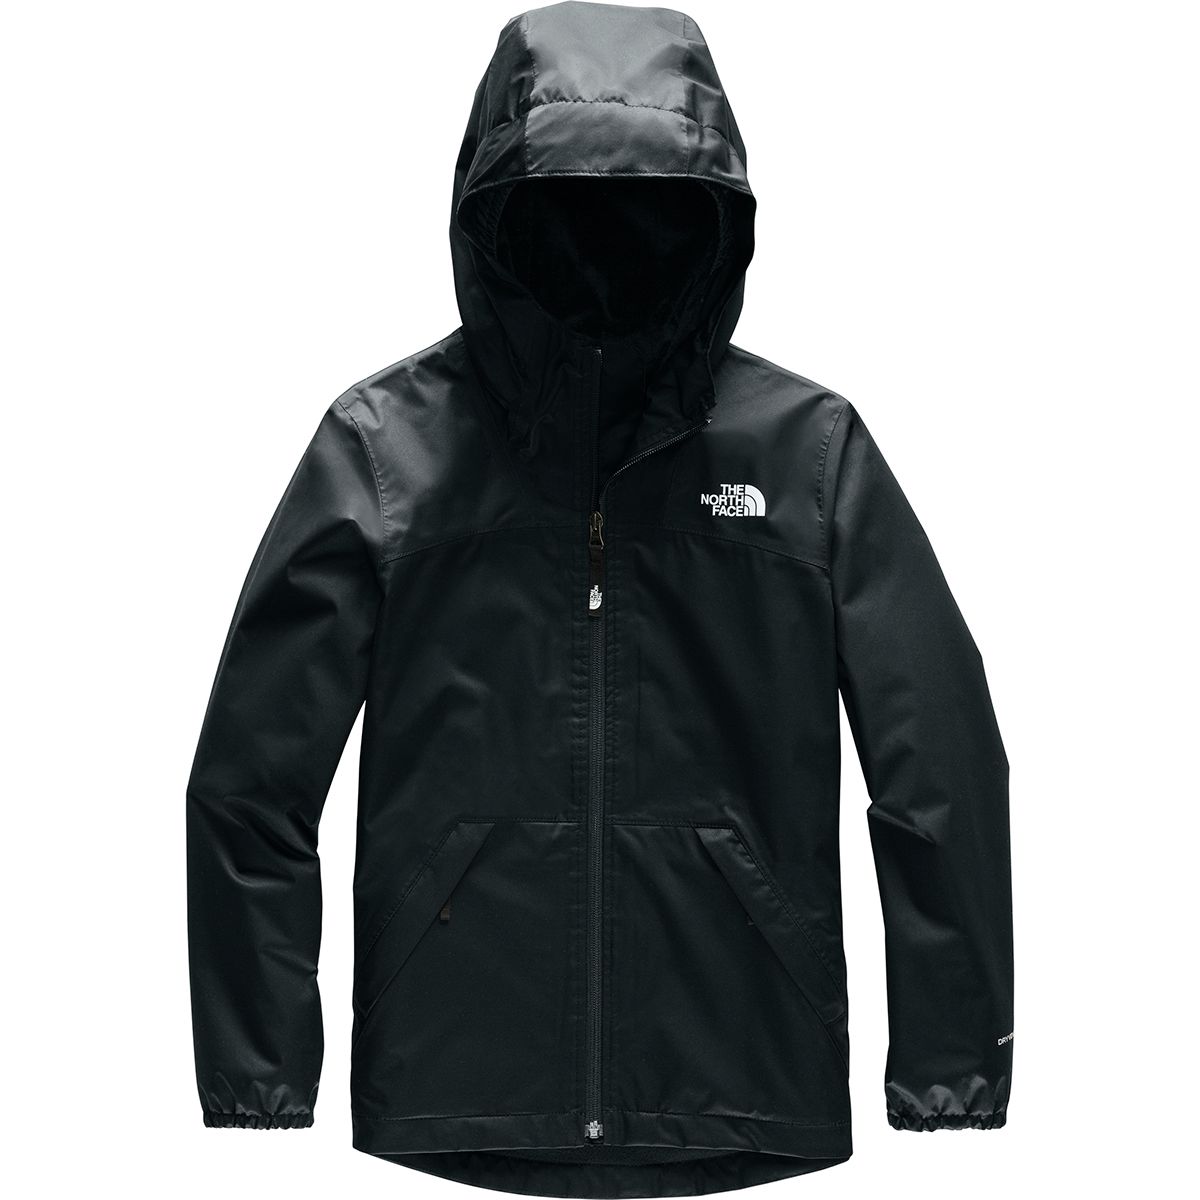 The North Face Warm Storm Hooded Jacket - Girls'